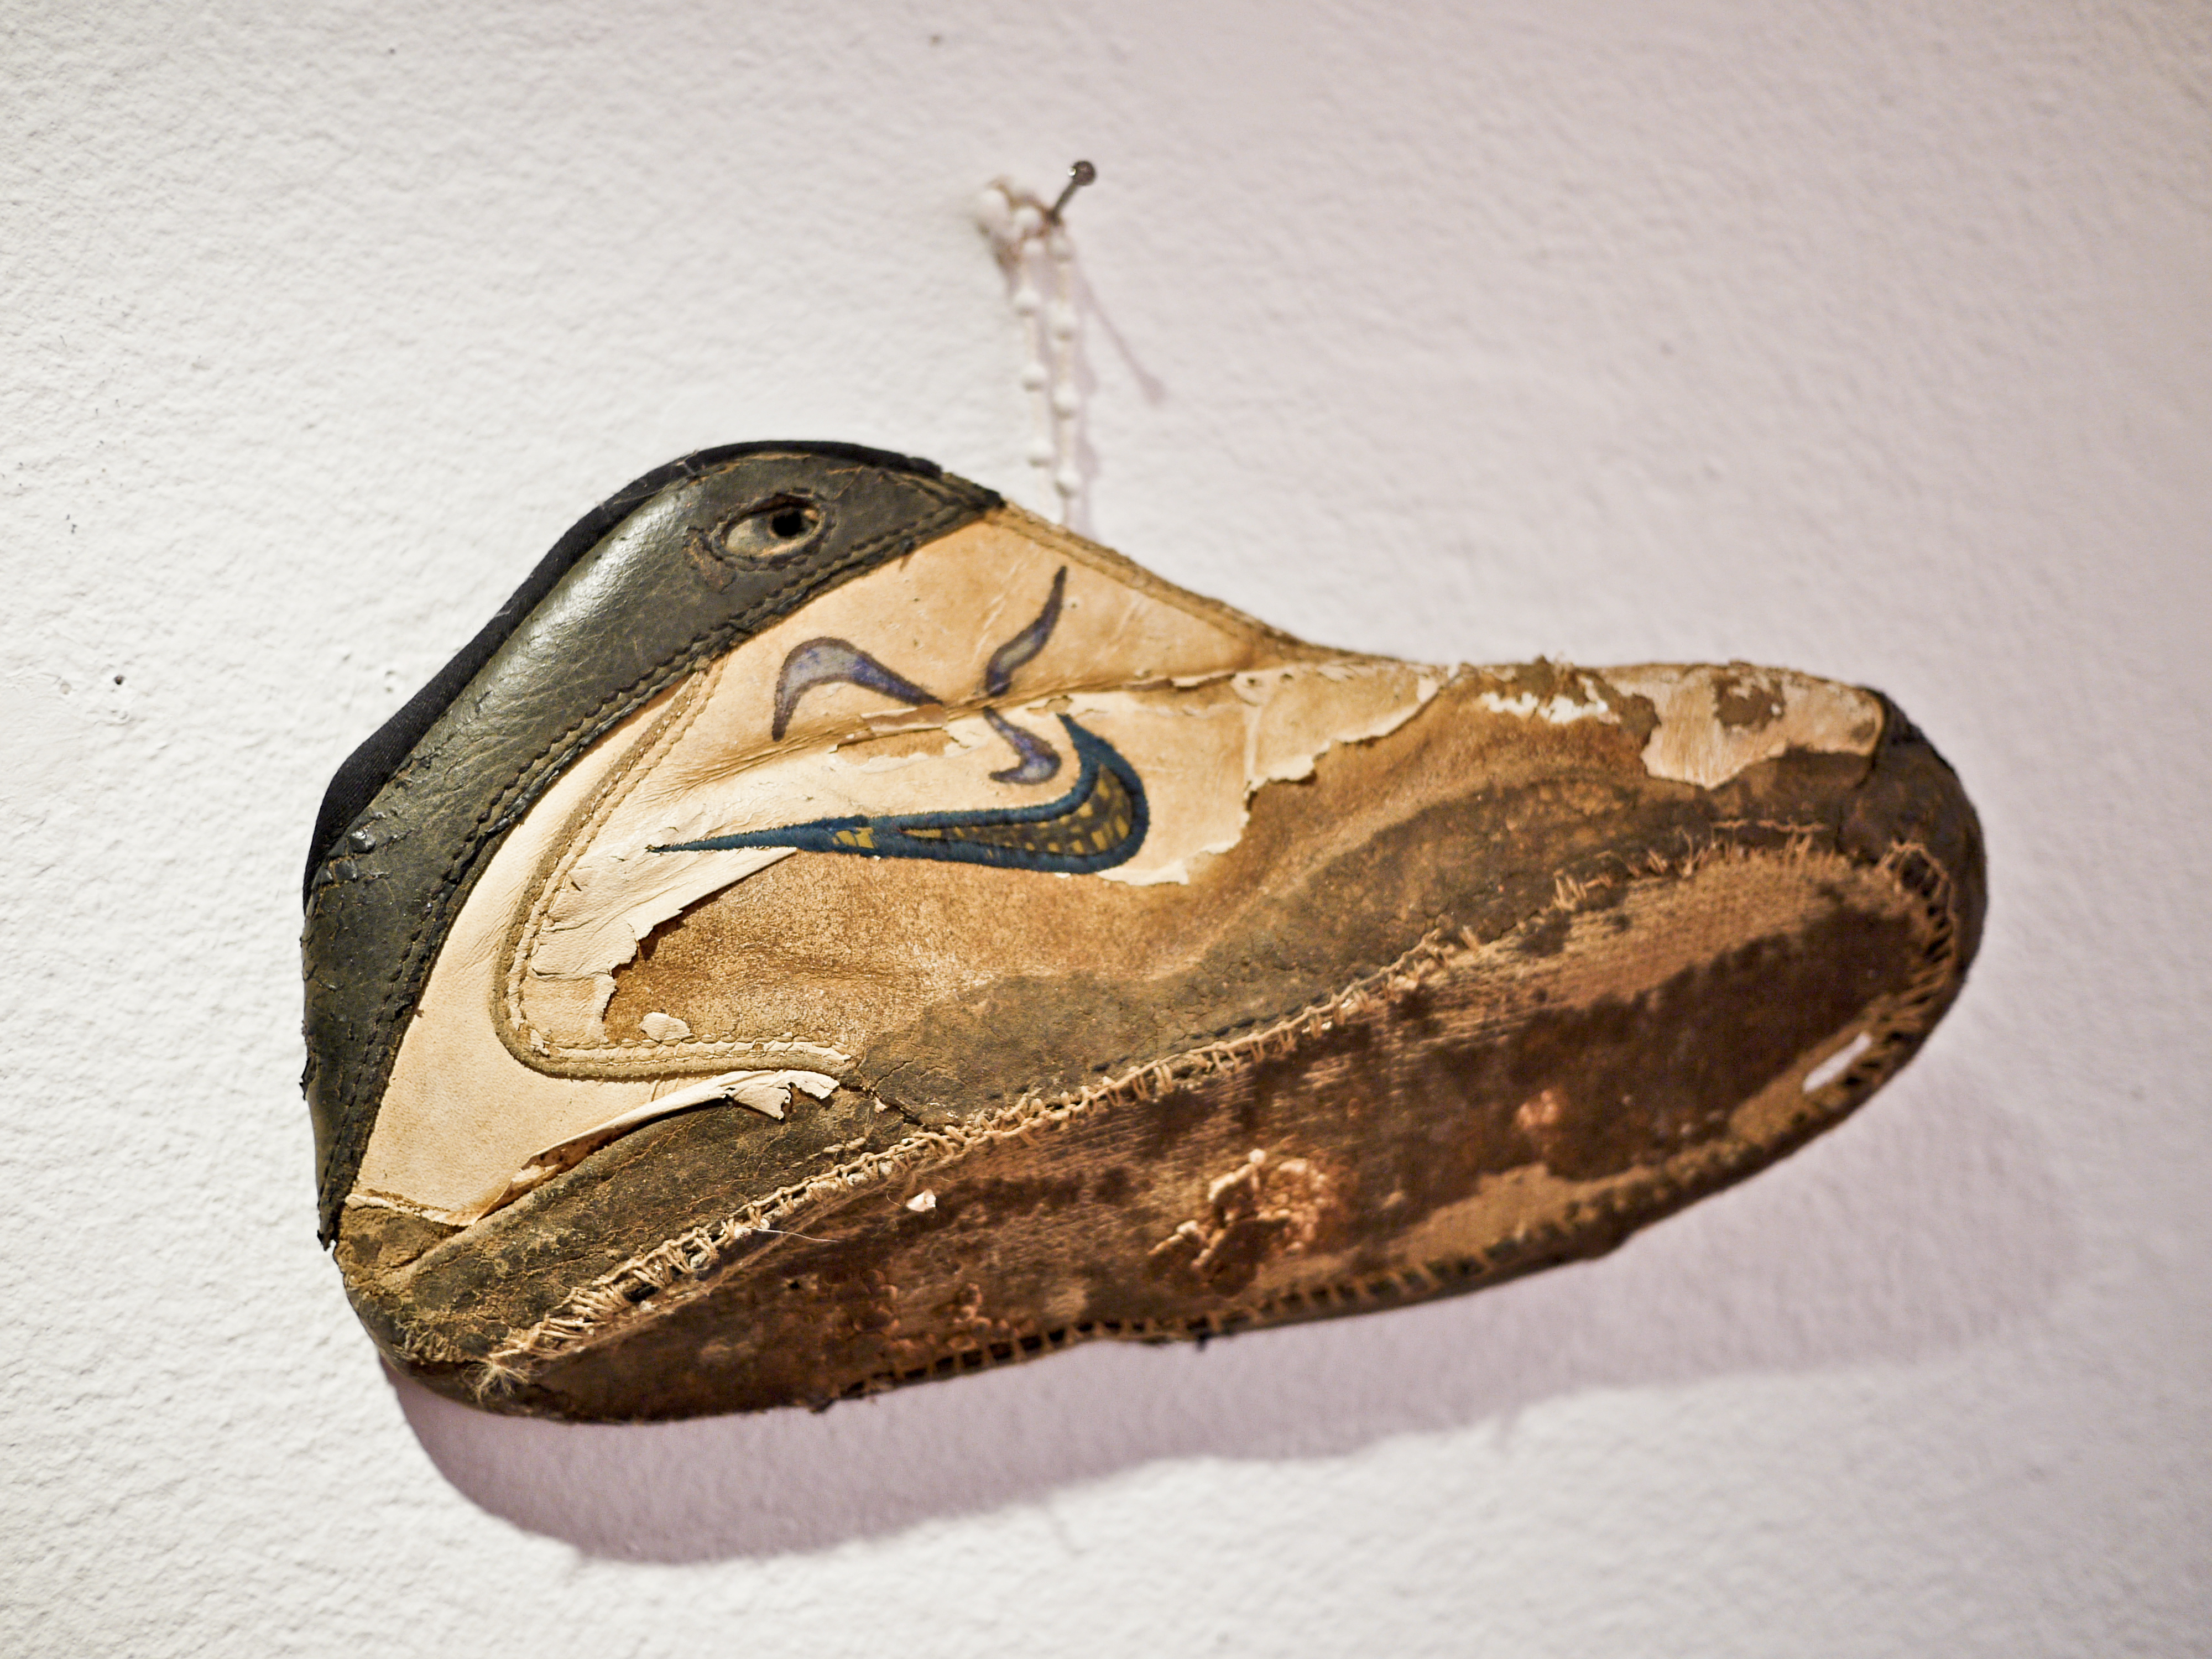 02. Charley CASE - NIKE PIQUE - chaussure, encre - 2013